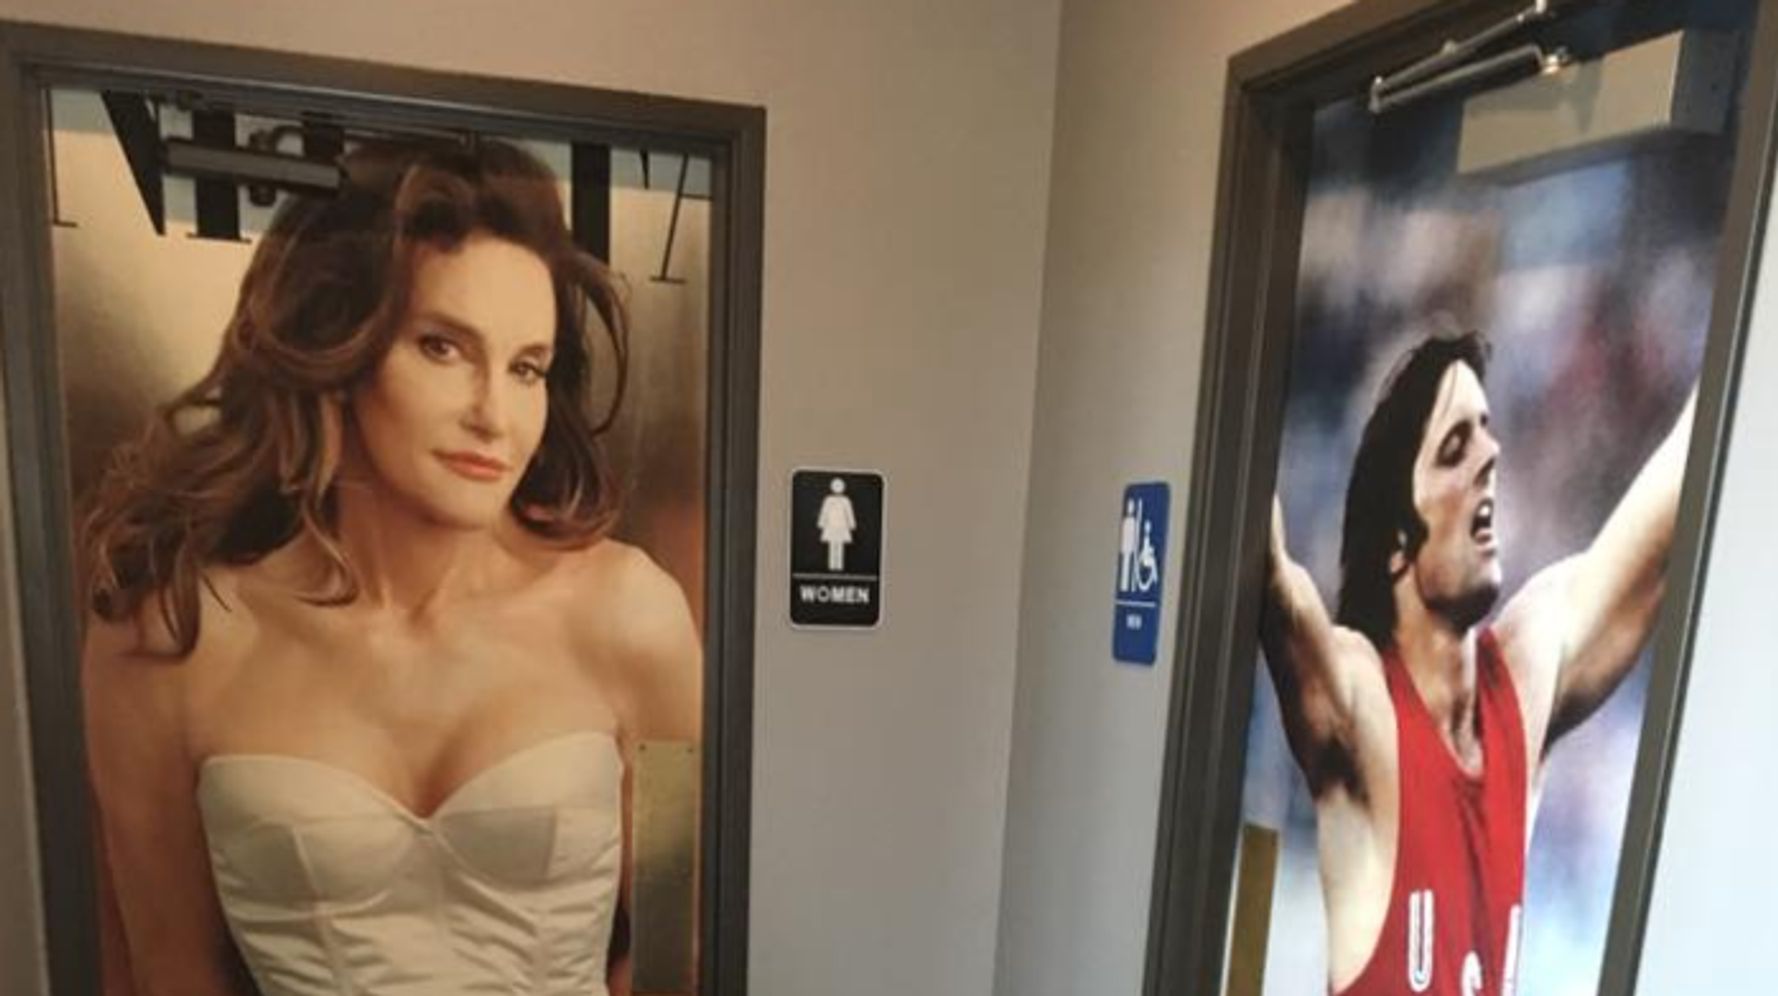 My local bar has a picture of Jenner on both bathrooms. : r